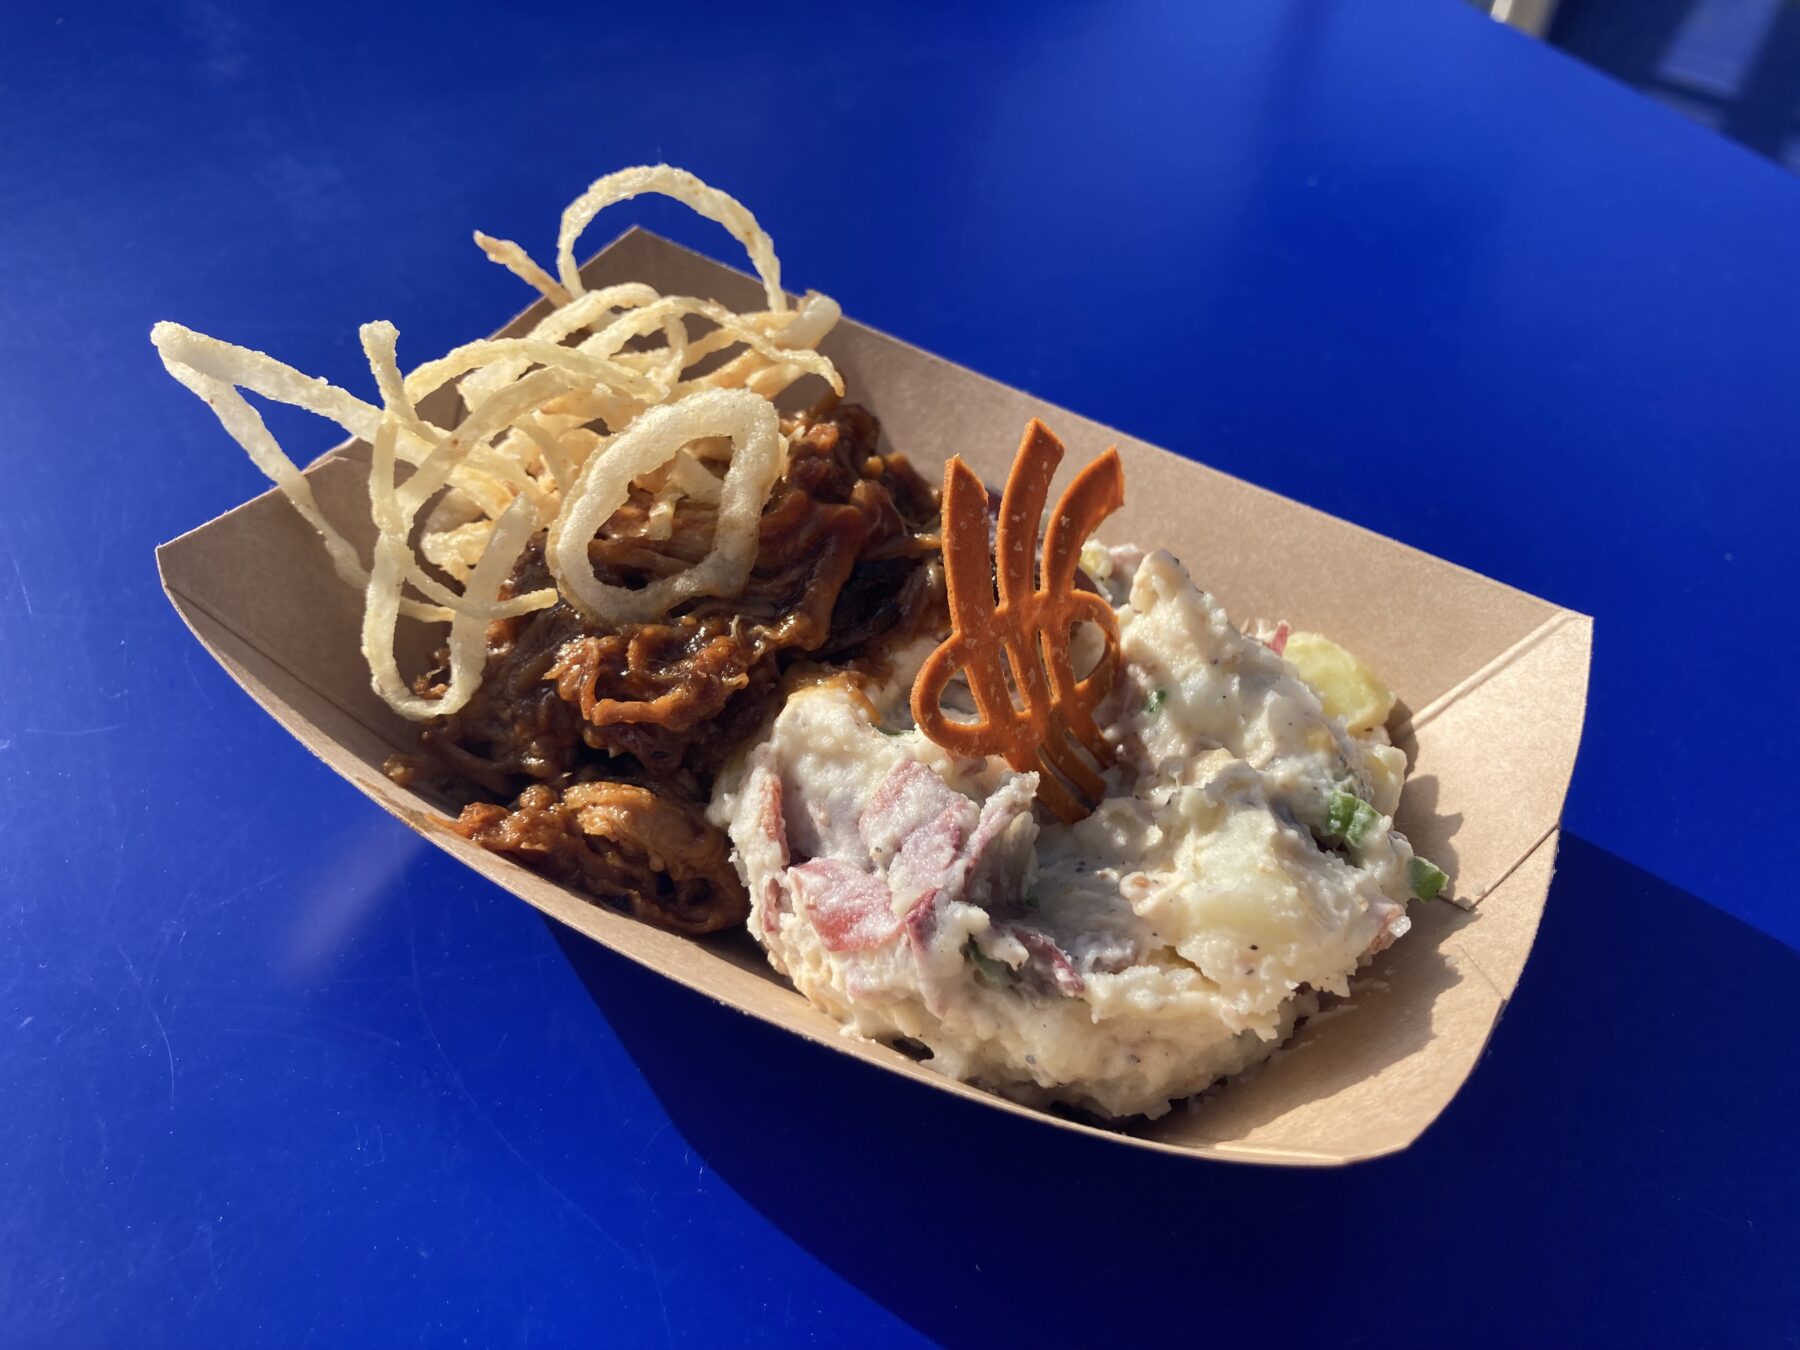 A container filled with pulled pork, crispy onions, and potato salad, topped with an RRC Polytech cracker.